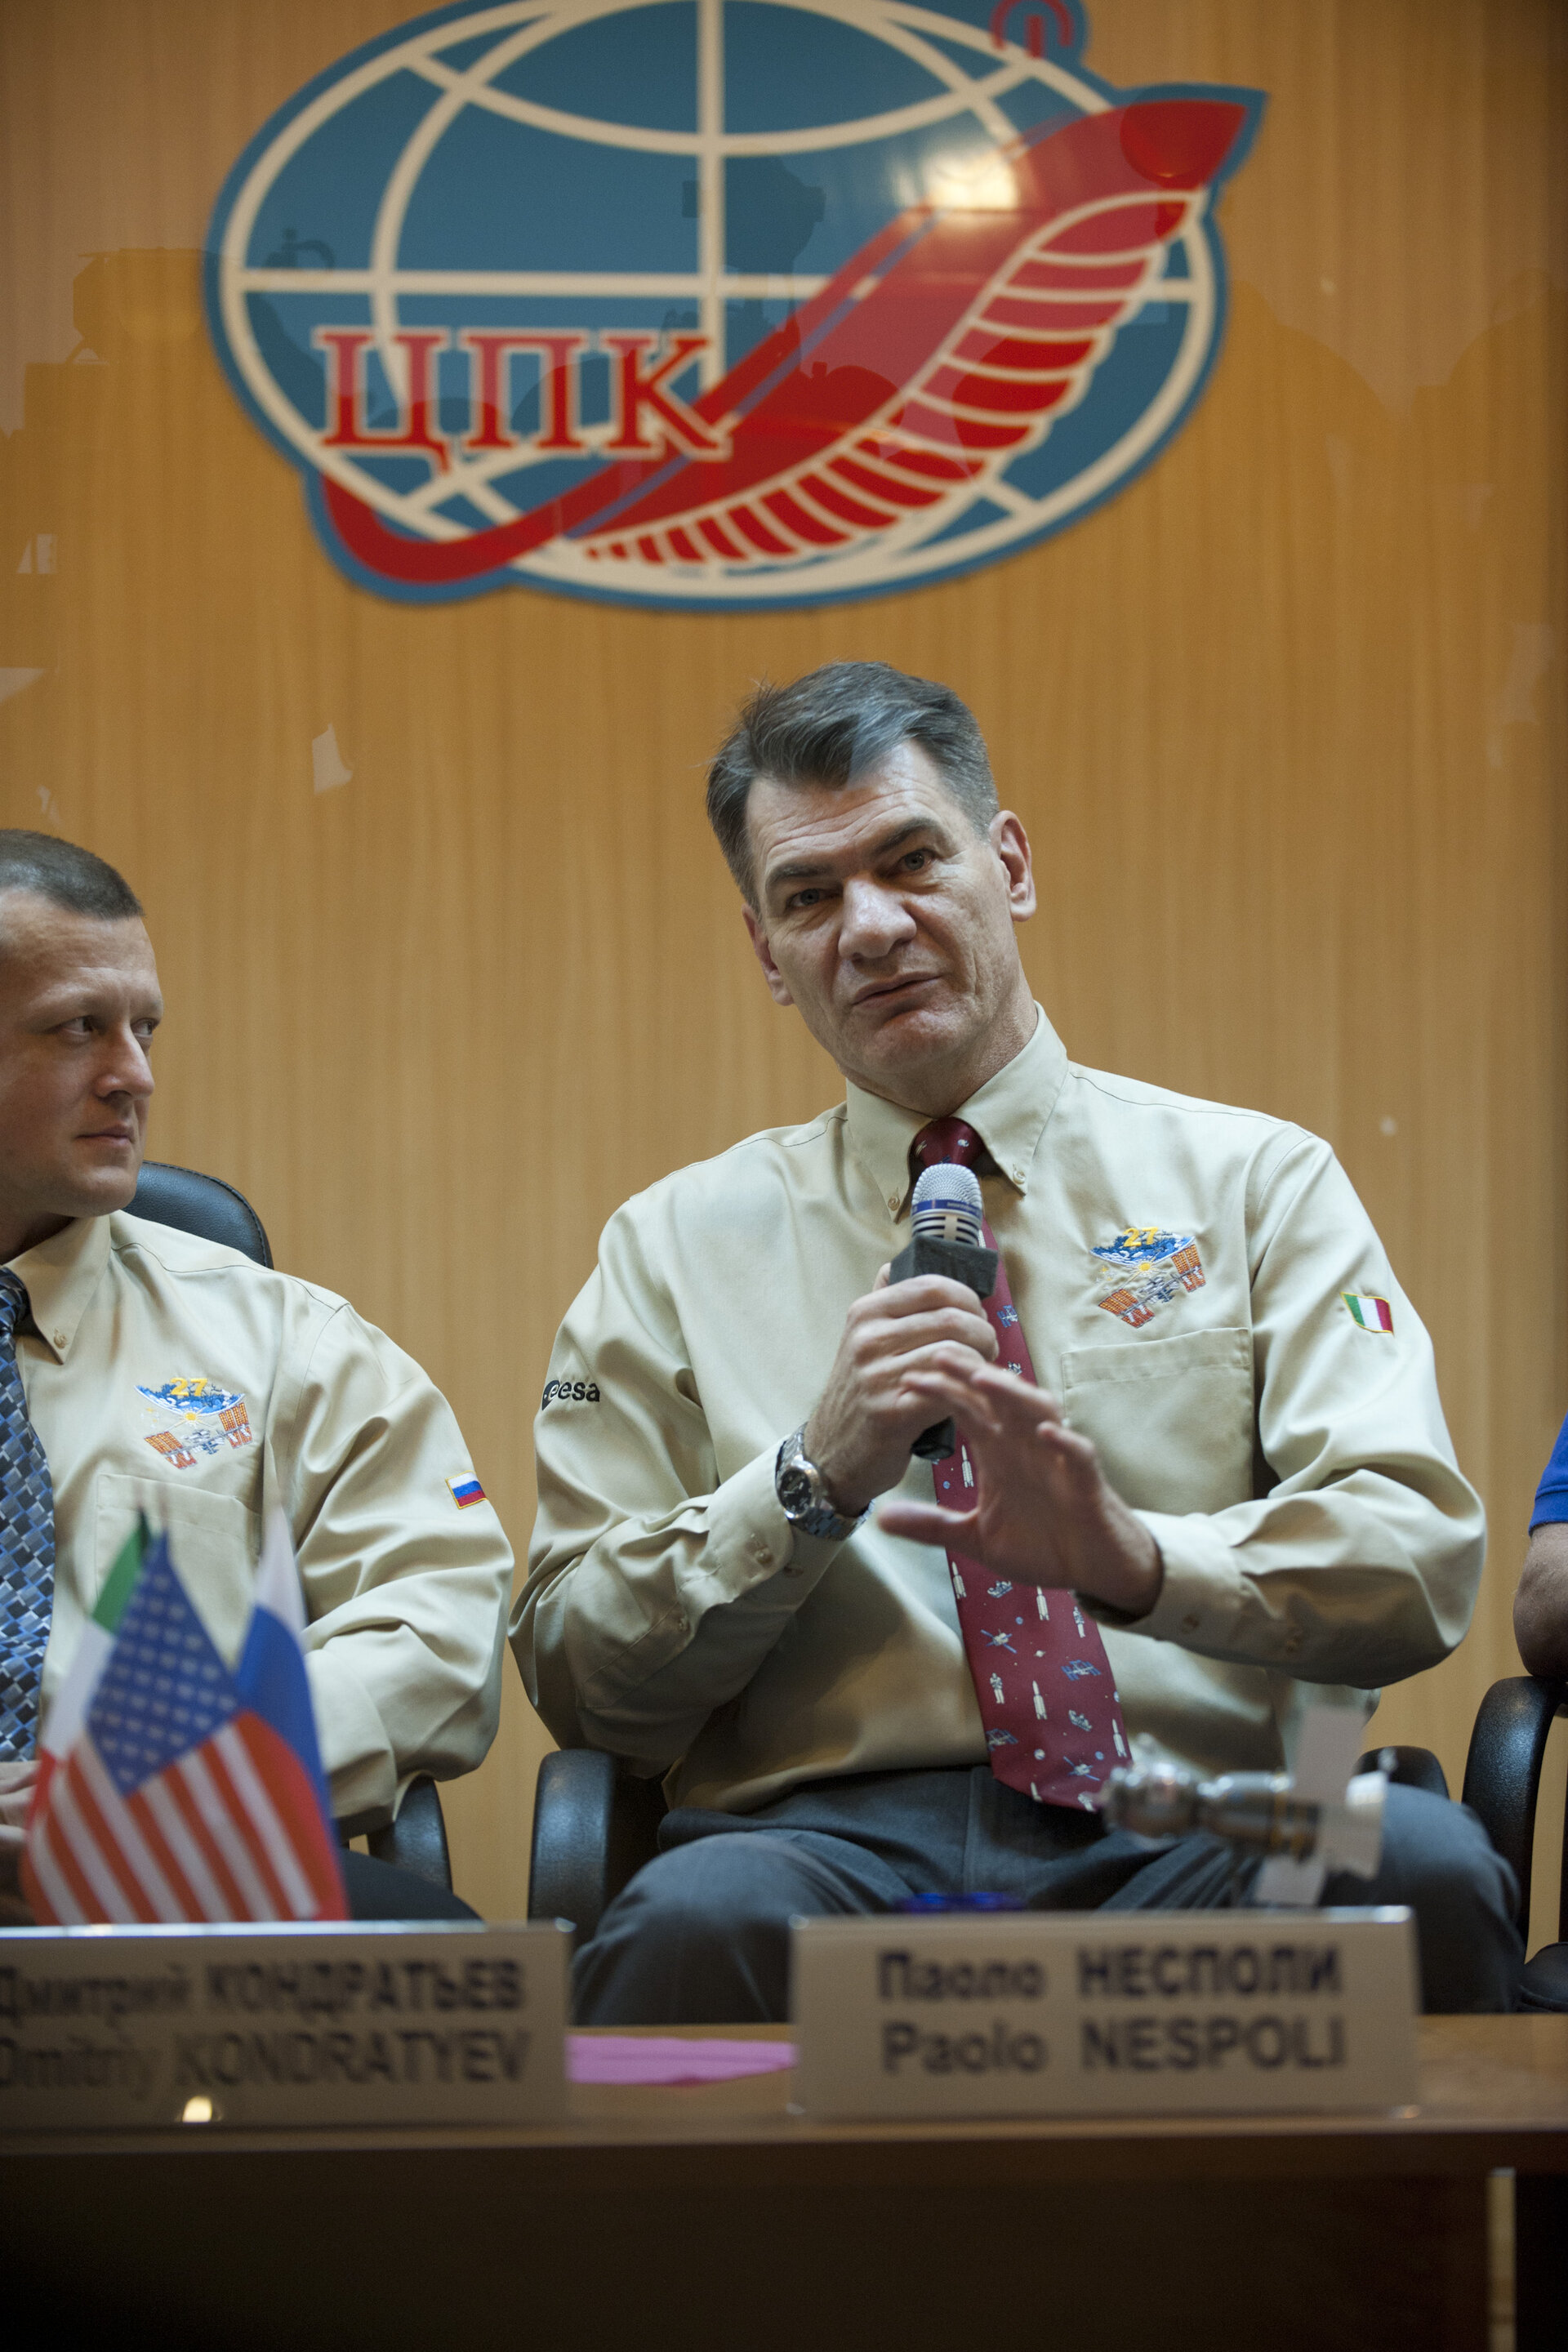 Paolo Nespoli during the State Commission meeting